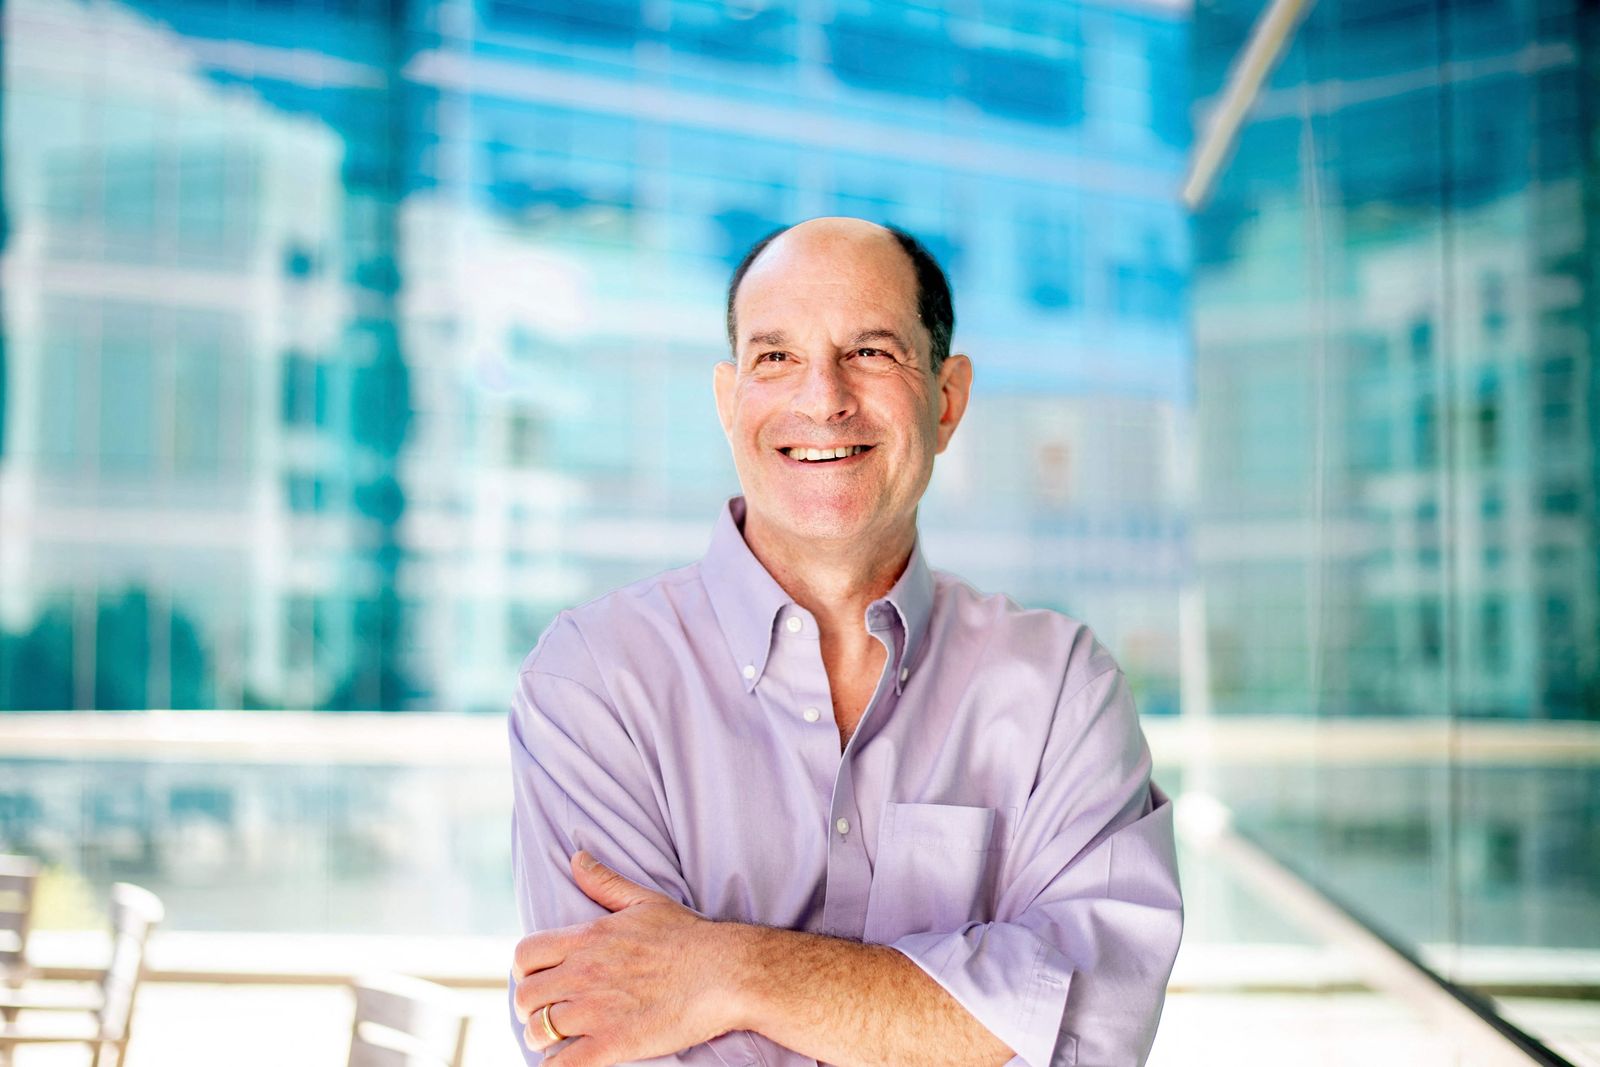 This handout photo taken on September 5, 2019 in San Francisco and released on October 4, 2021 by the University of California San Francisco (UCSF) shows David Julius, PhD, professor and chair of the university's Department of Physiology, posing for a portrait after winning the 2020 Breakthrough Prize in Life Sciences. - US scientists David Julius and Ardem Patapoutian on October 4, 2021 won the Nobel Medicine Prize for discoveries on receptors for temperature and touch, the jury said. (Photo by Noah Berger / UCSF / AFP) / RESTRICTED TO EDITORIAL USE - MANDATORY CREDIT 